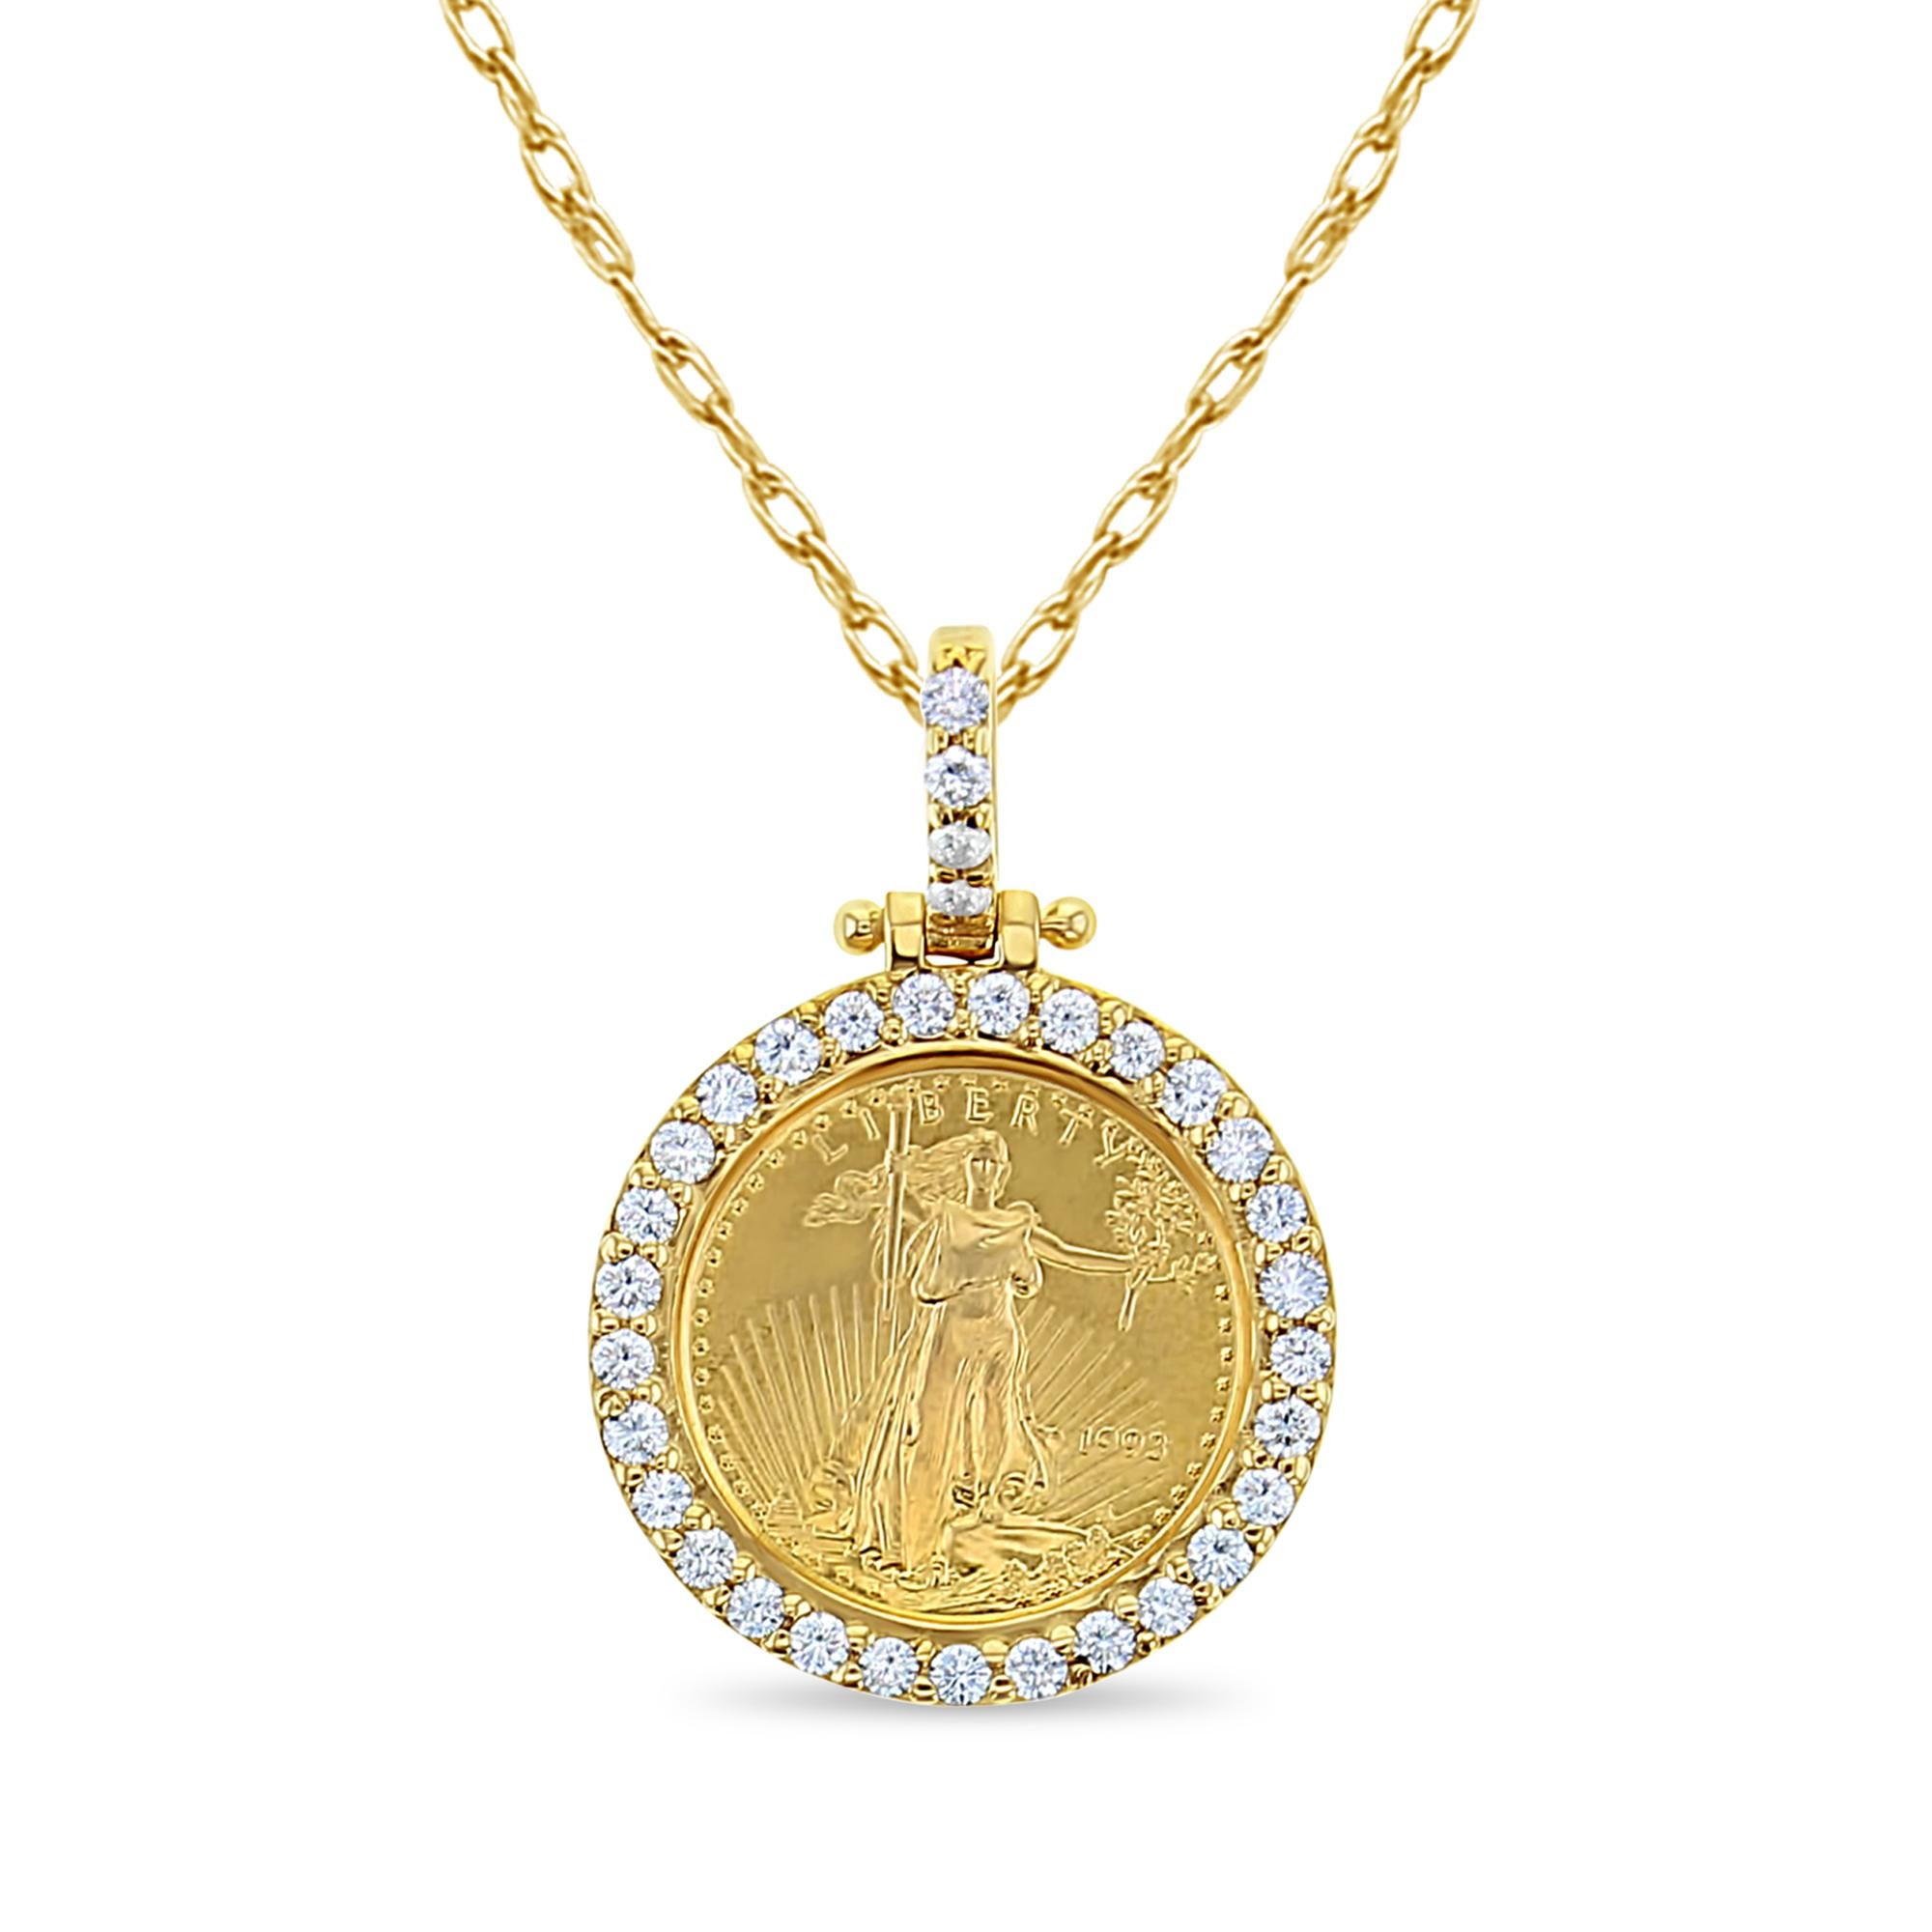 Shared Prong 1/10OZ Lady Liberty Diamond Halo Necklace .70cttw 14k Yellow Gold or 14k White Gold 

Elevate your style with our stunning Shared Prong 1/10OZ Lady Liberty Diamond Halo Necklace, available in both 14k Yellow Gold and 14k White Gold.